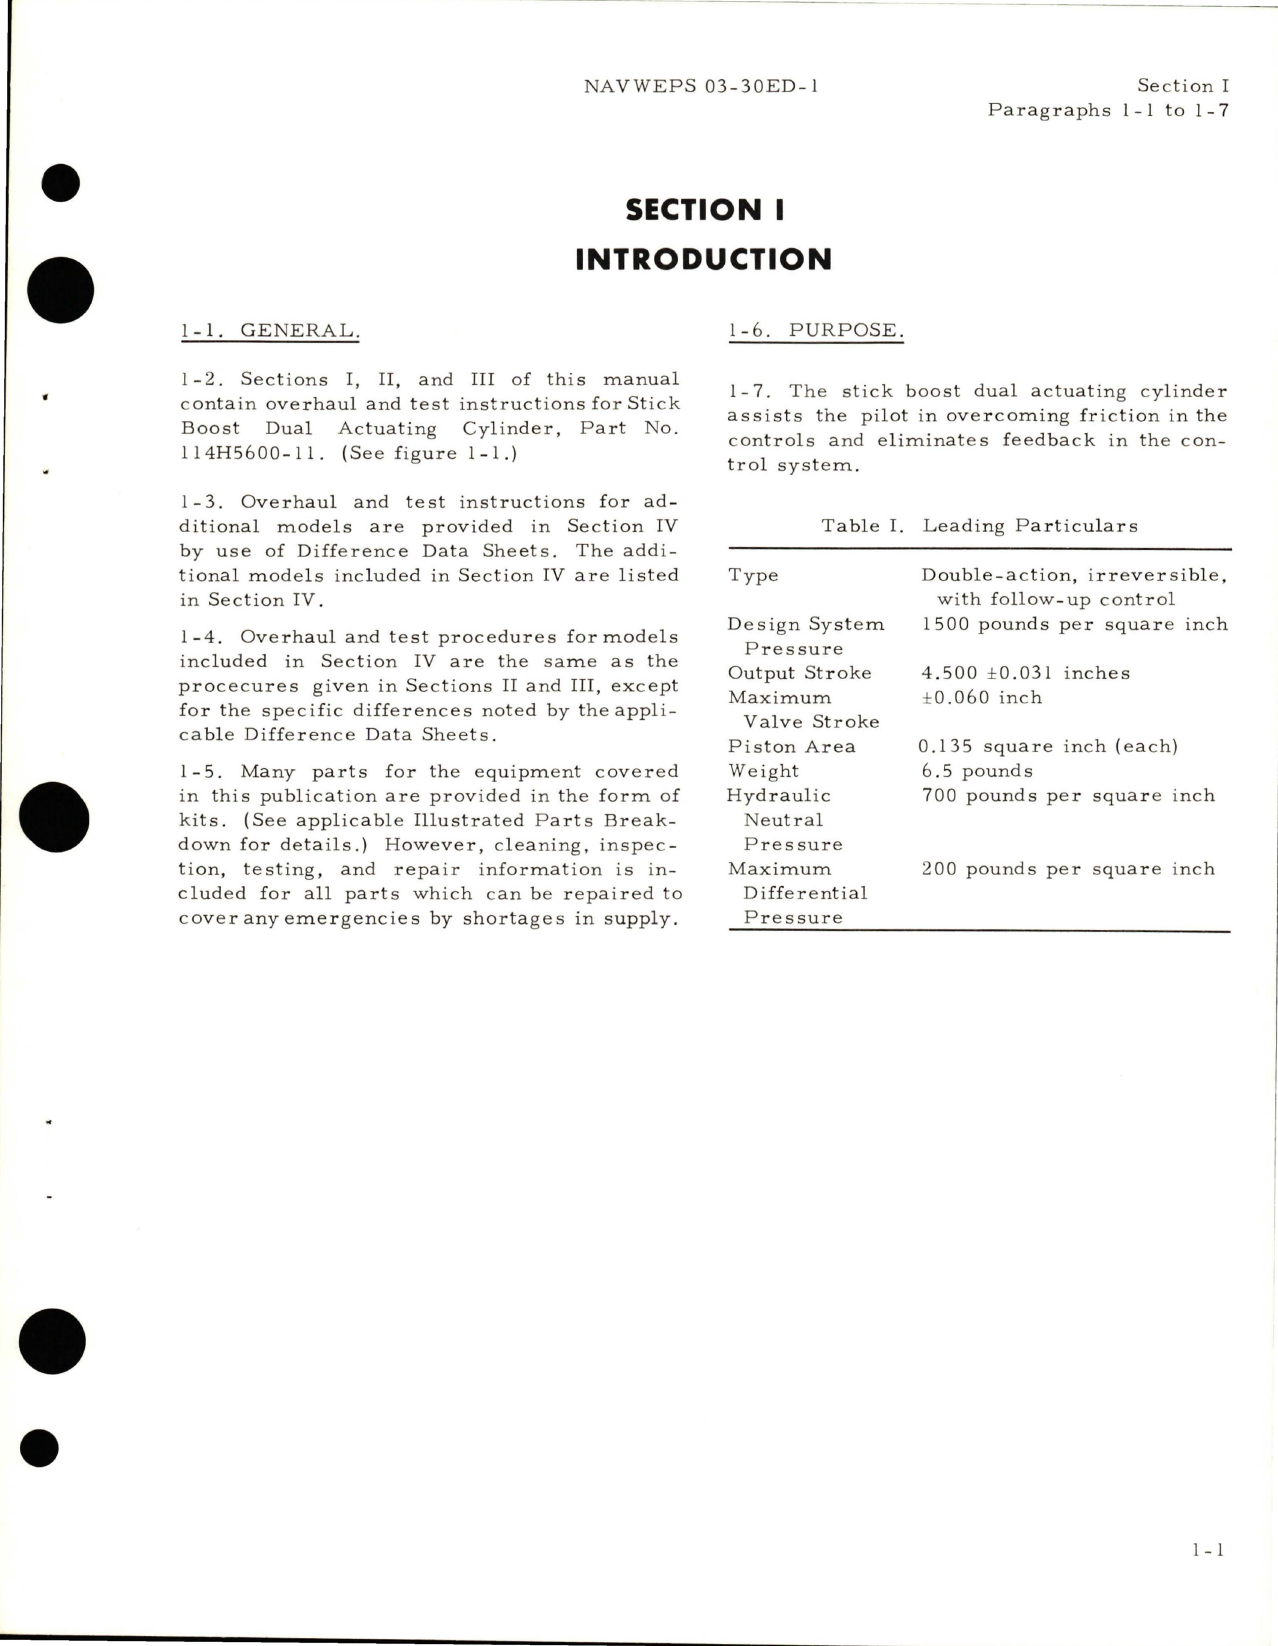 Sample page 5 from AirCorps Library document: Overhaul Instructions for Stick Boost Dual Actuating Cylinder - Part 114H5600-11 and 114H5600-12